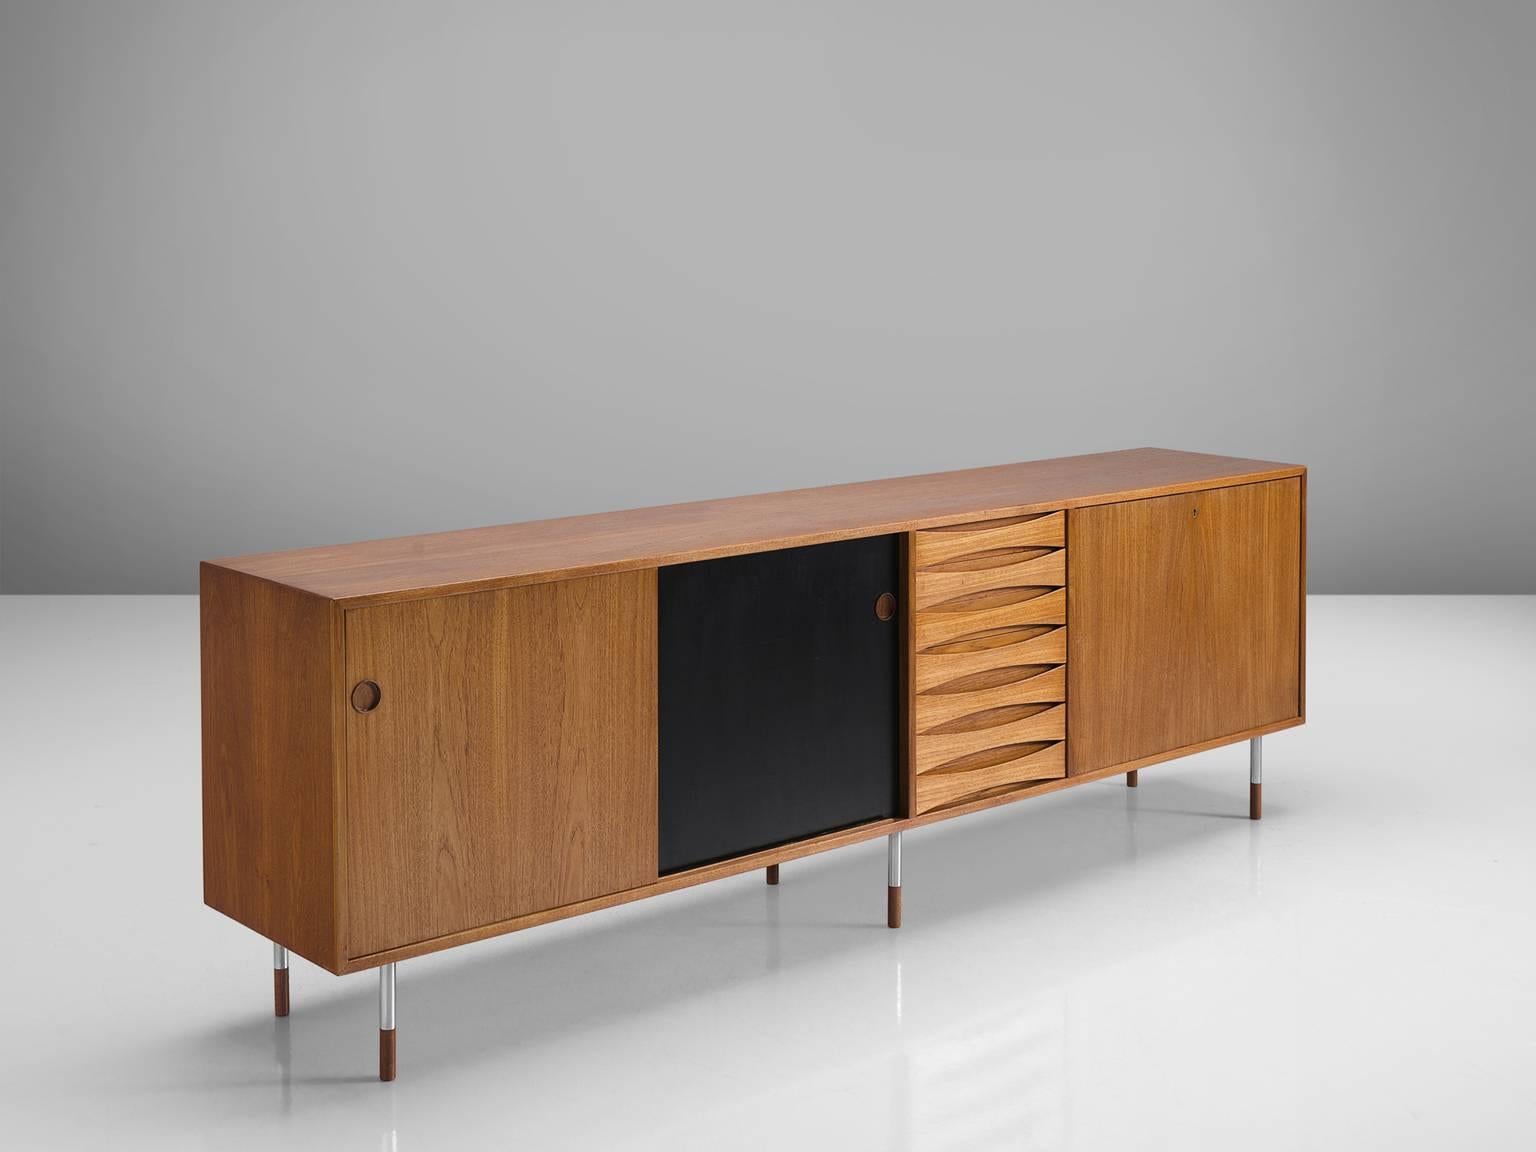 Arne Vodder for P. Olsen Sibast Møbler, credenza model 29A, in teak and metal, by Denmark, 1959.

This iconic sideboard in teak is designed by the Danish designer Arne Vodder. The typical refined Vodder details can be found on this sideboard such as